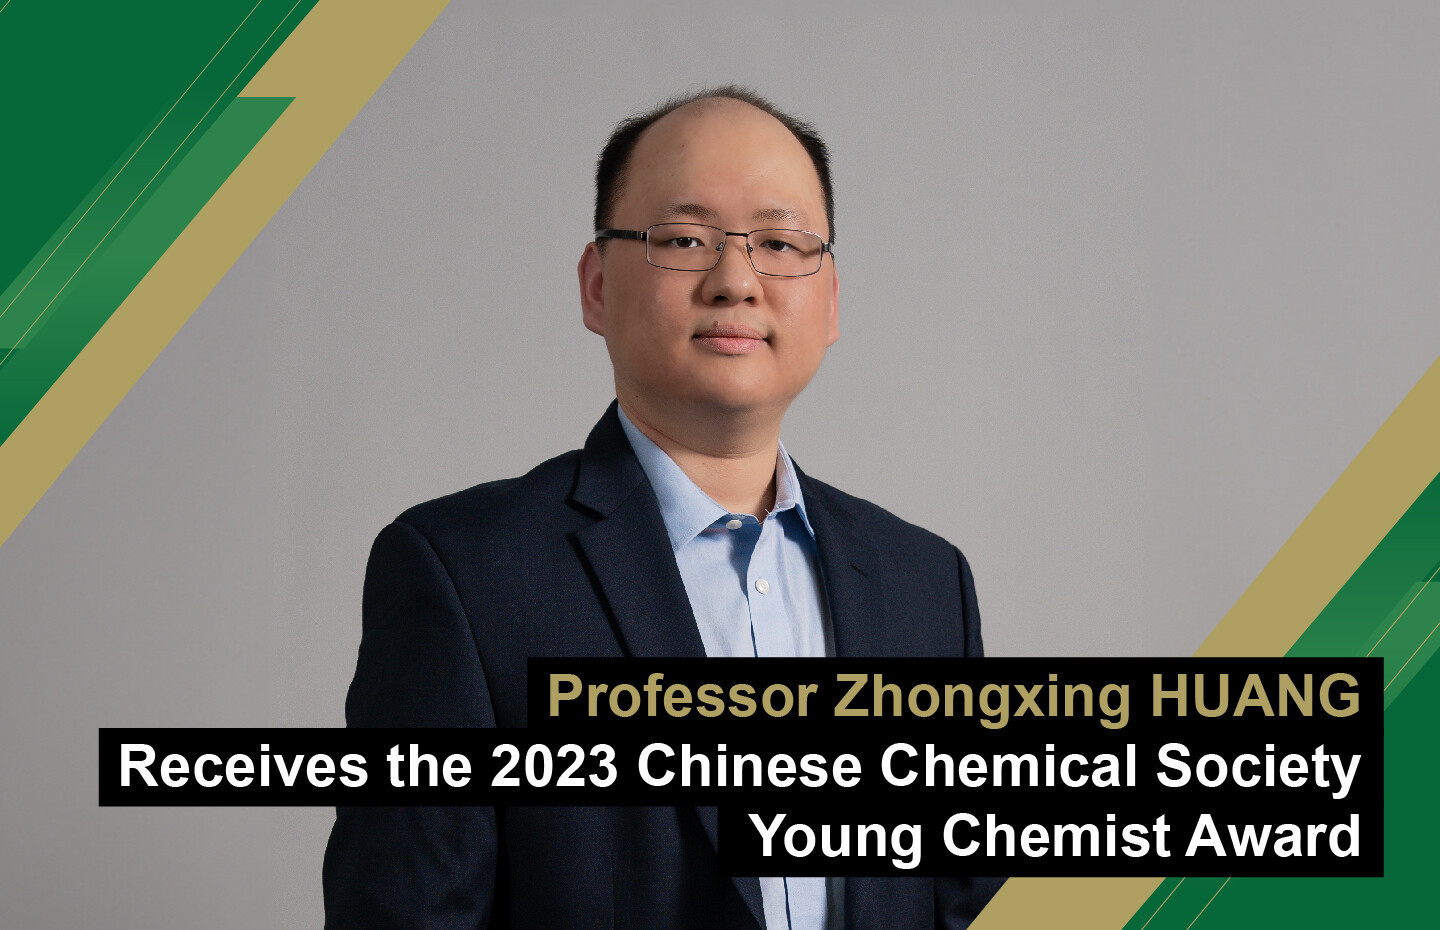 Professor Zhongxing HUANG Receives the 2023 Chinese Chemical Society Young Chemist Award